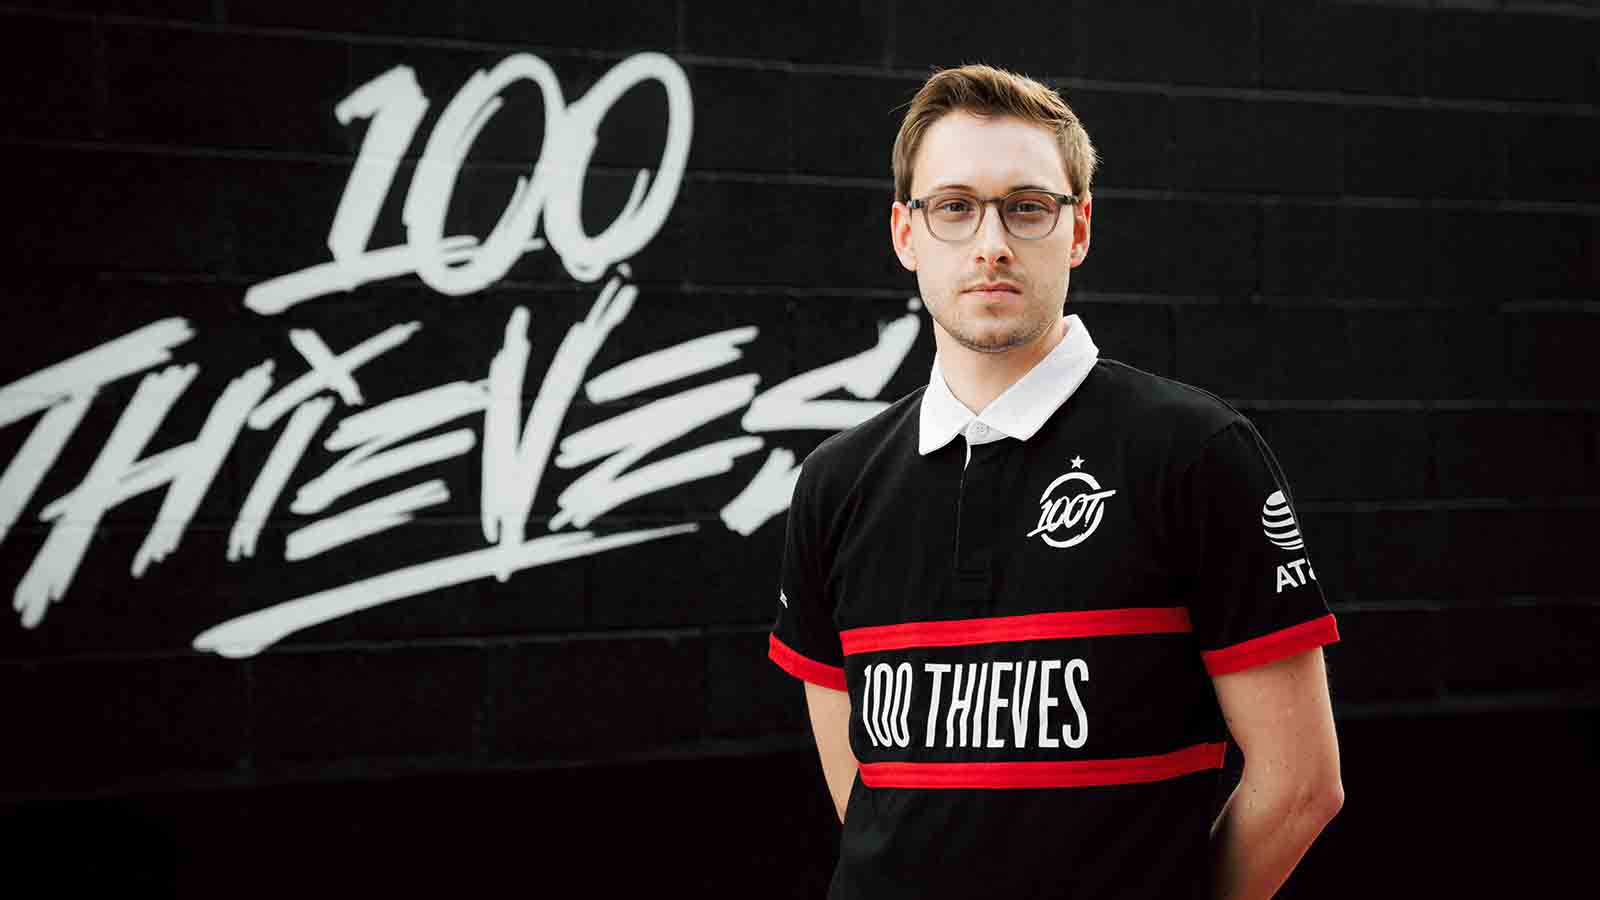 Bjergsen apologizes to Nadeshot for dramatic LCS retirement: “I’m sorry about that” – Egaxo